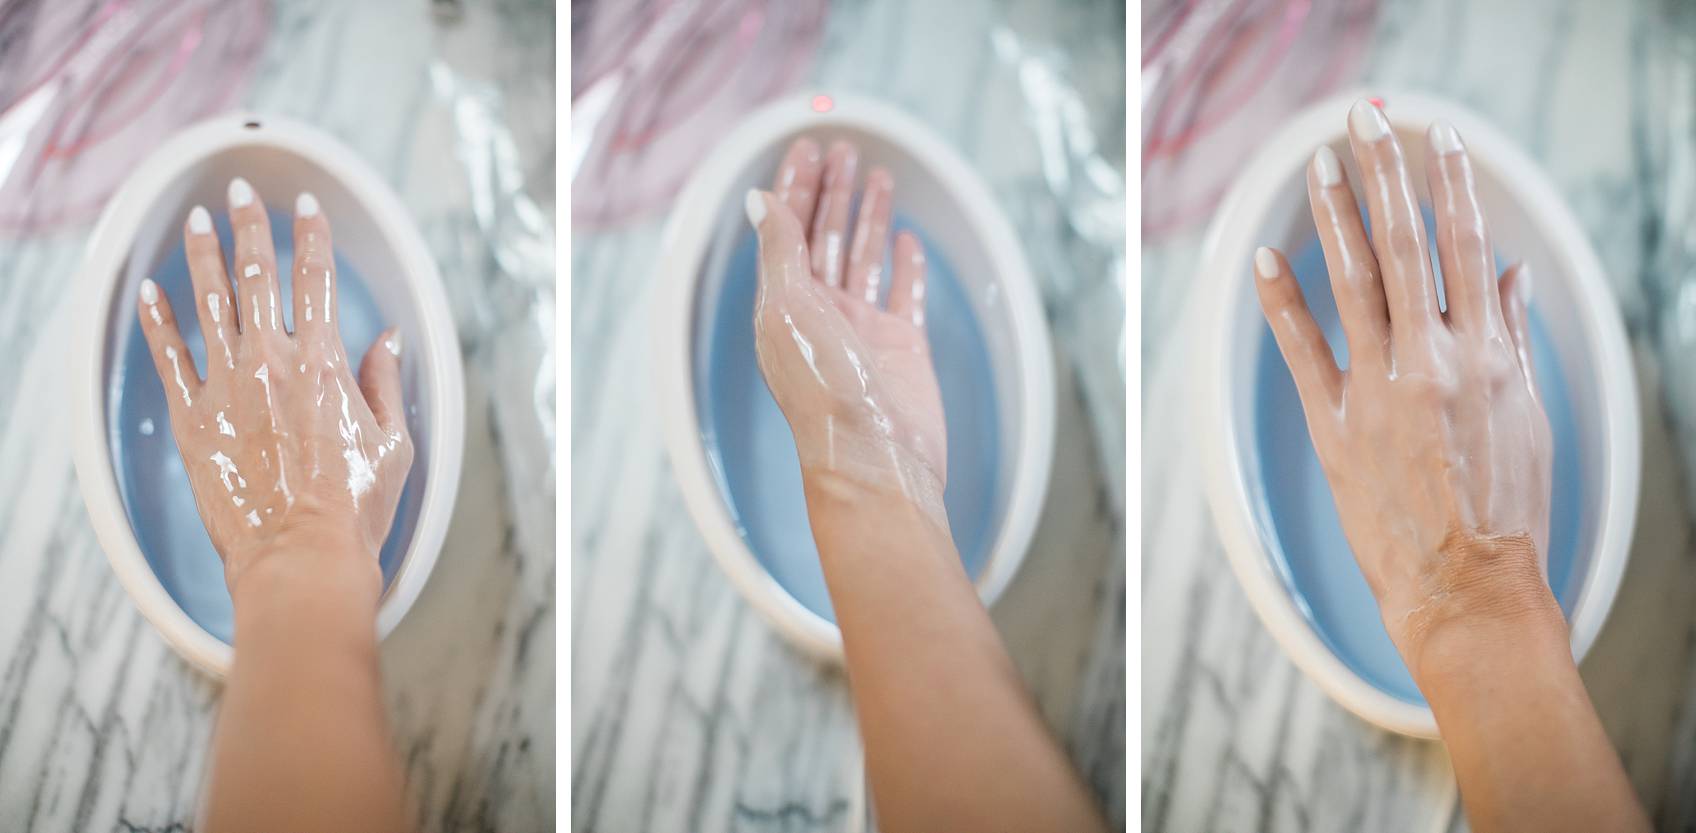 conair paraffin wax bath - a how to and before after photos